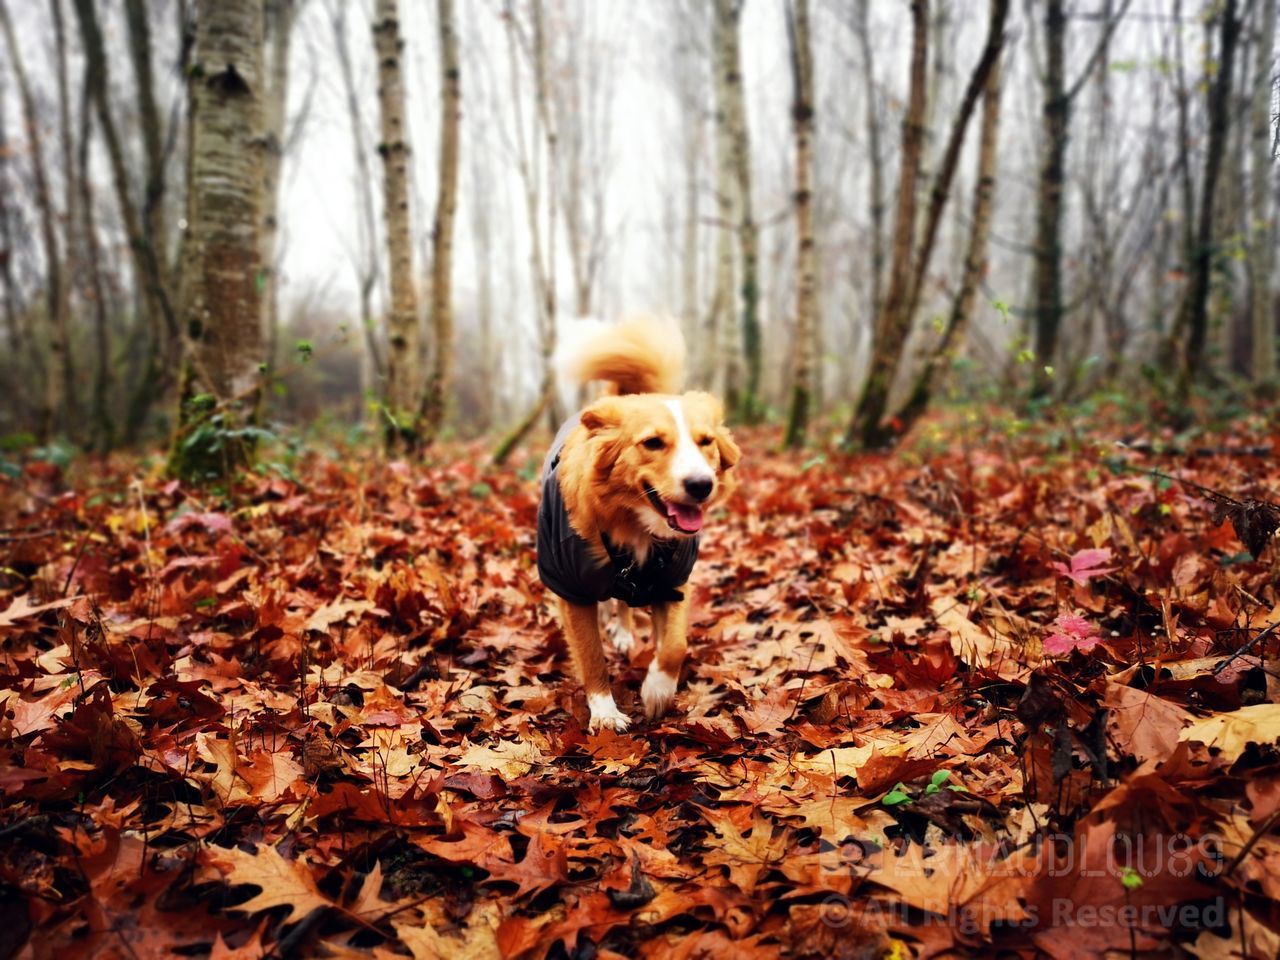 dog, canine, domestic, pets, one animal, domestic animals, mammal, tree, autumn, animal themes, leaf, plant part, animal, change, land, forest, nature, day, vertebrate, plant, no people, leaves, woodland, outdoors